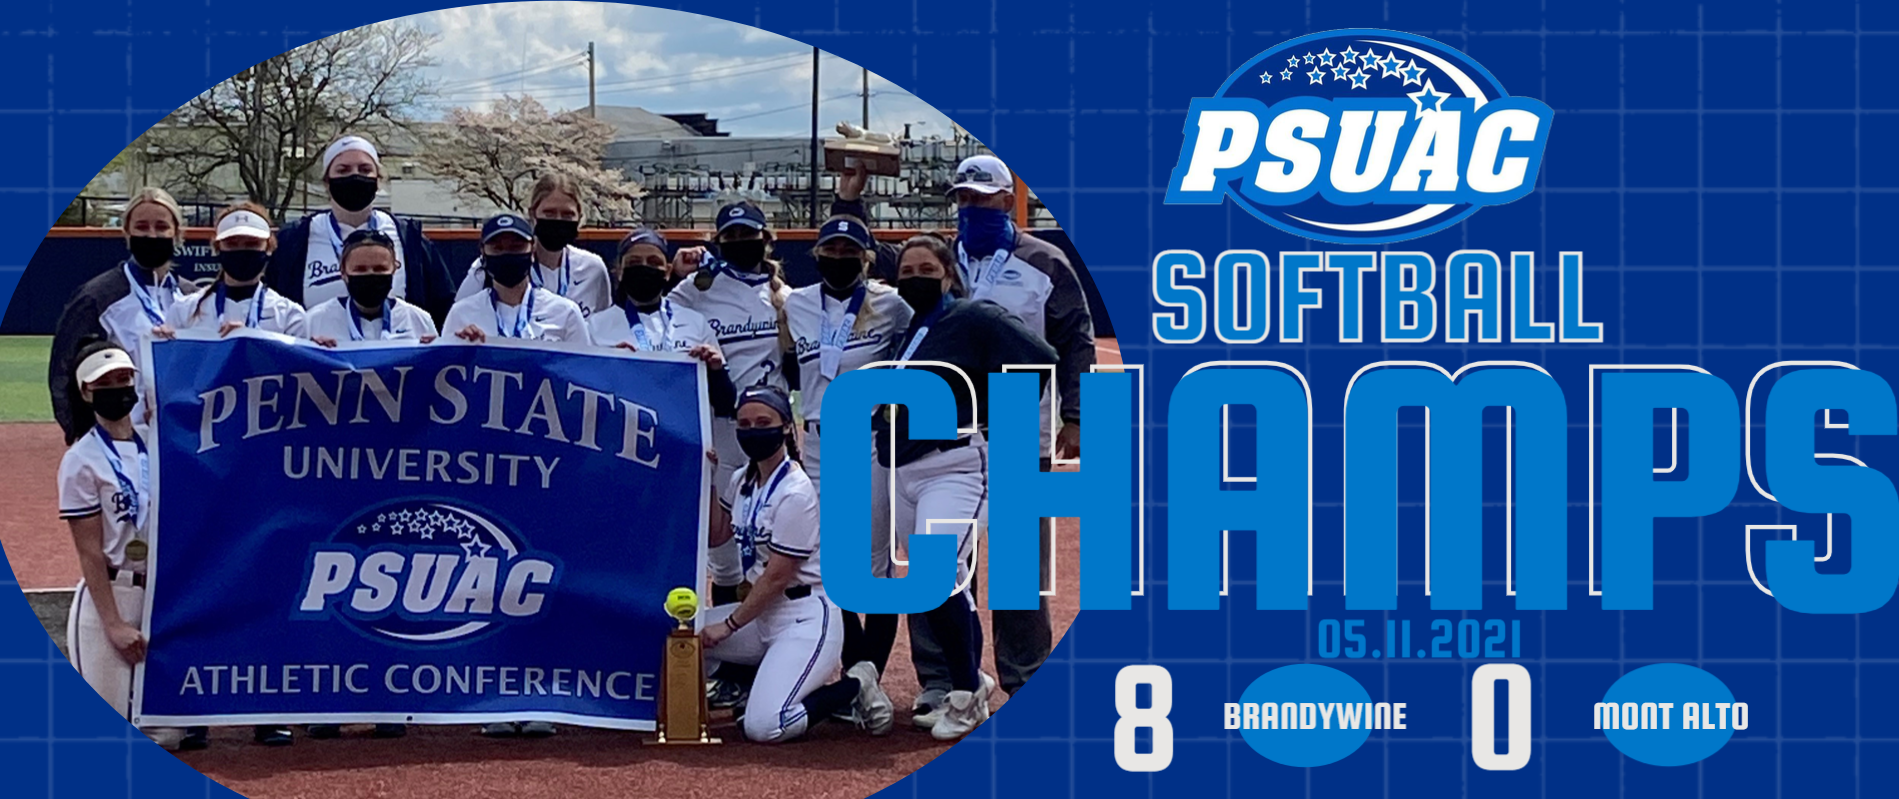 Penn State Brandywine won their sixth consecutive conference softball title on May 11, 2021 with an 8-0 win over Penn State Mont Alto.